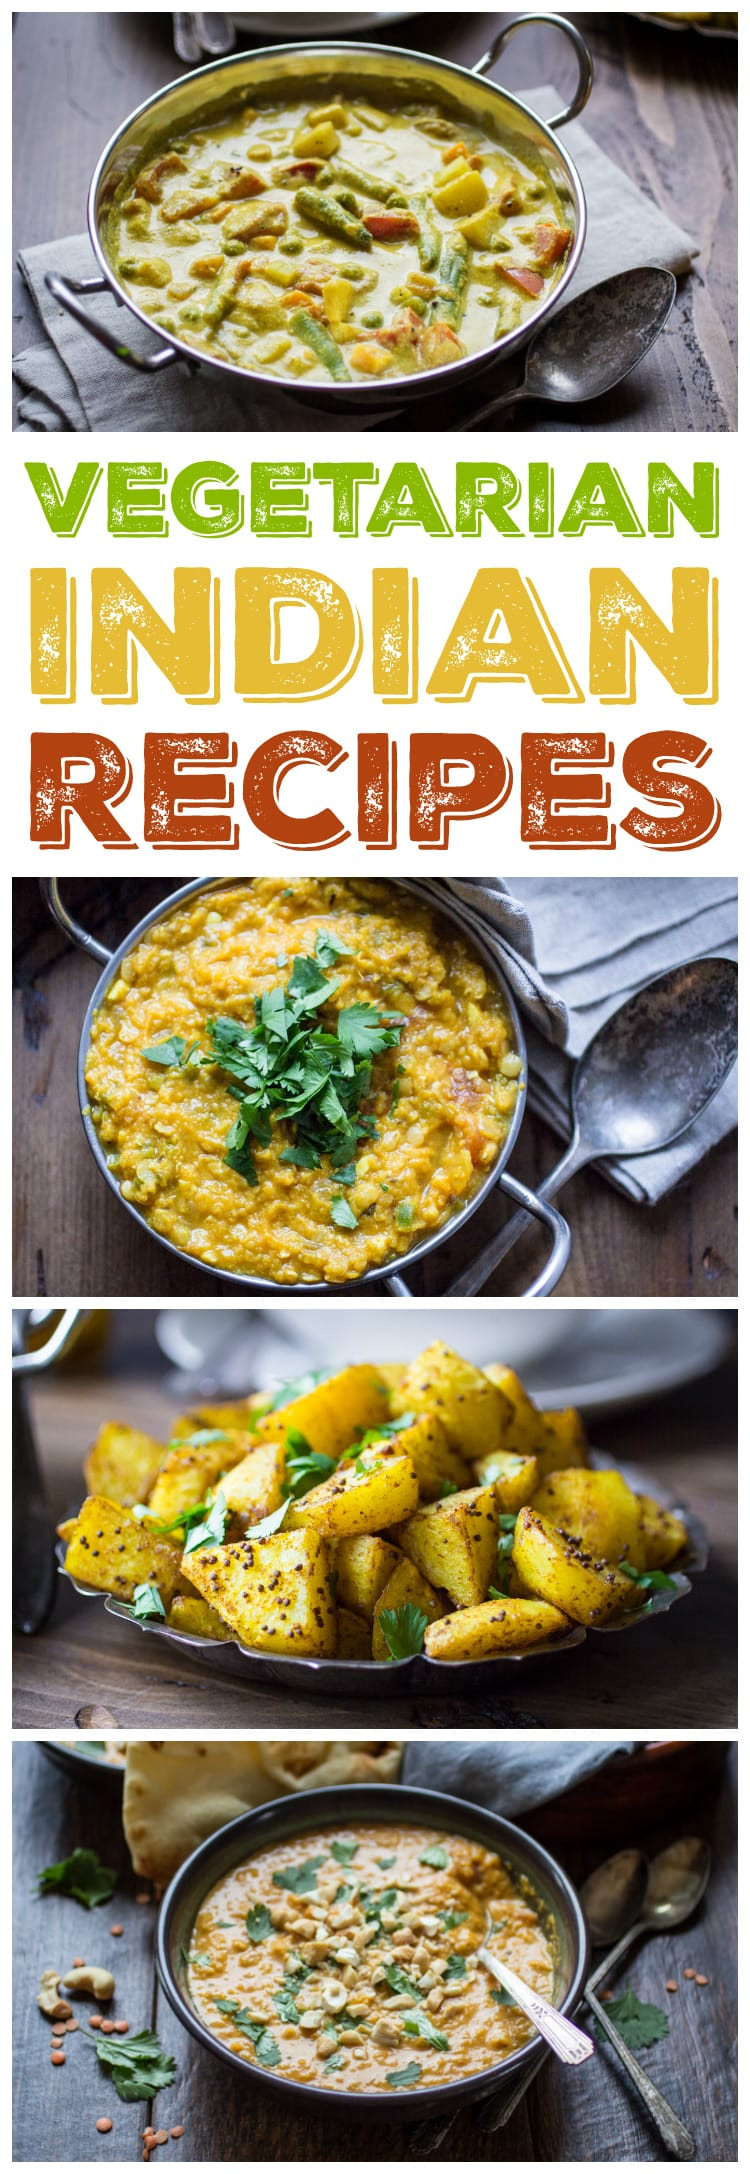 Southindian Vegetarian Recipes
 10 Ve arian Indian Recipes to Make Again and Again The